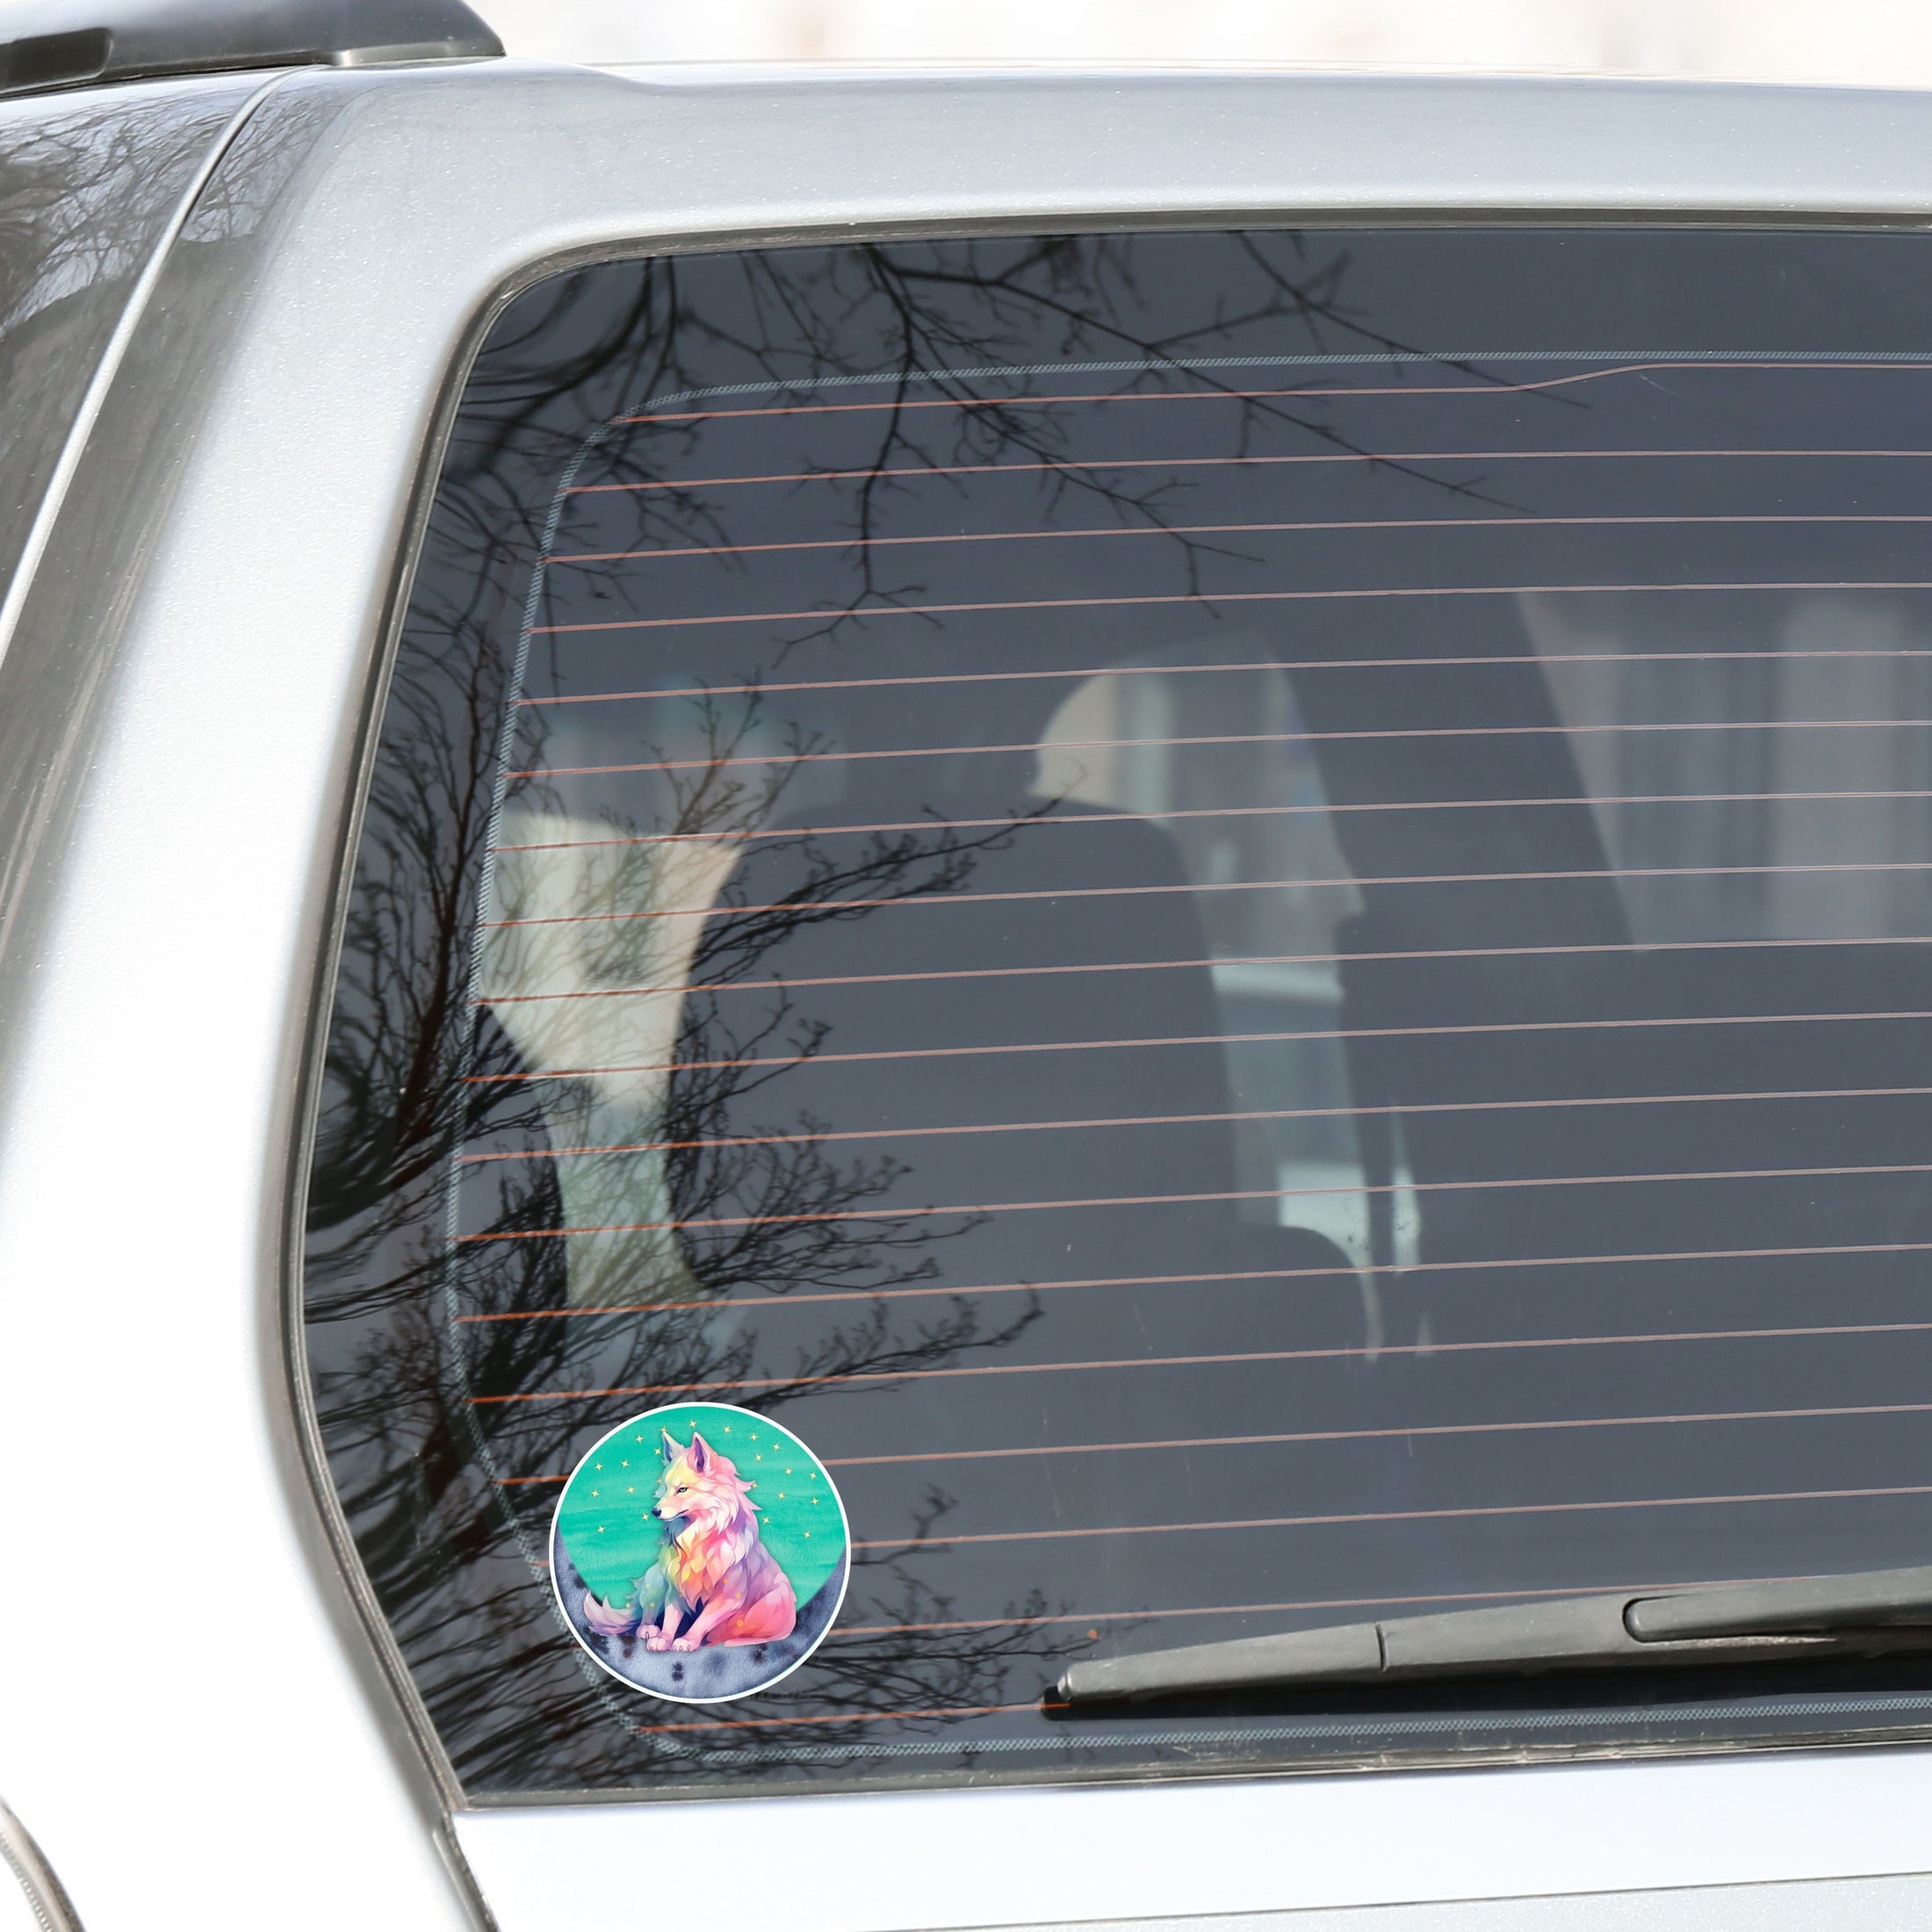 This image shows the starry wolf sticker on the back window of a car.